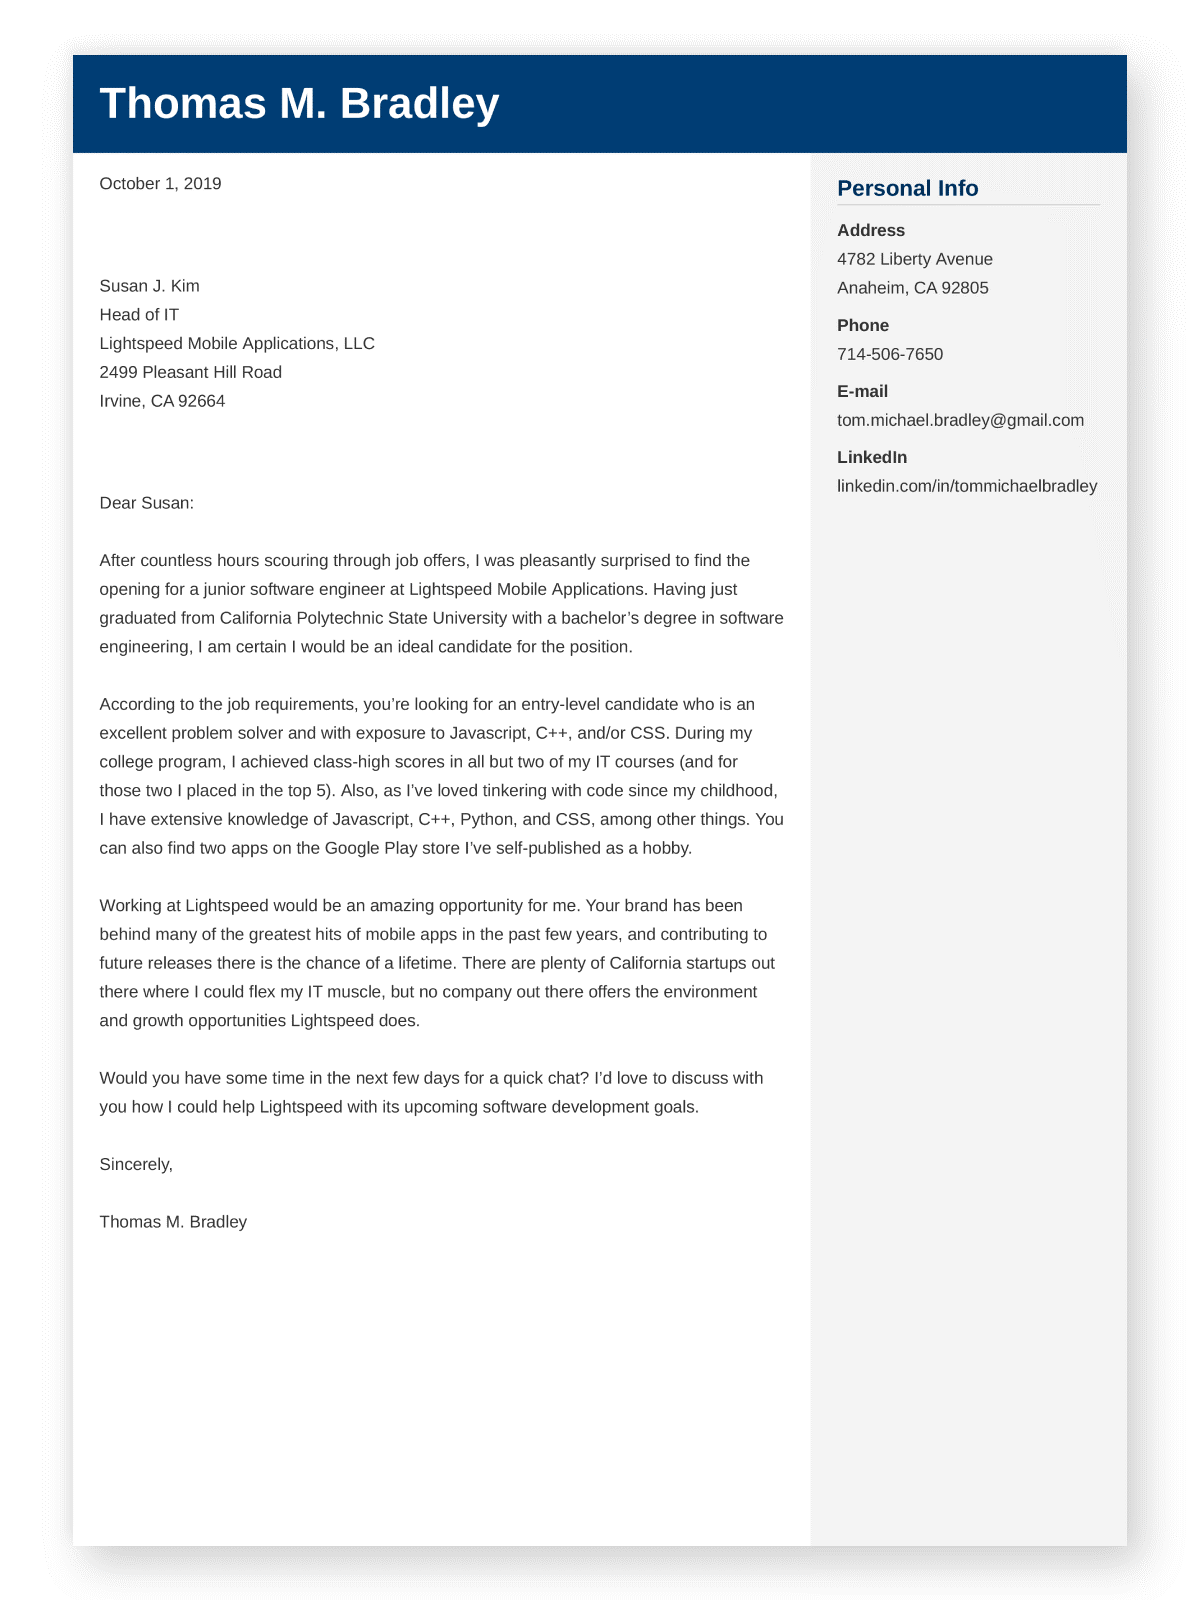 Spacing In A Cover Letter from cdn-images.zety.com